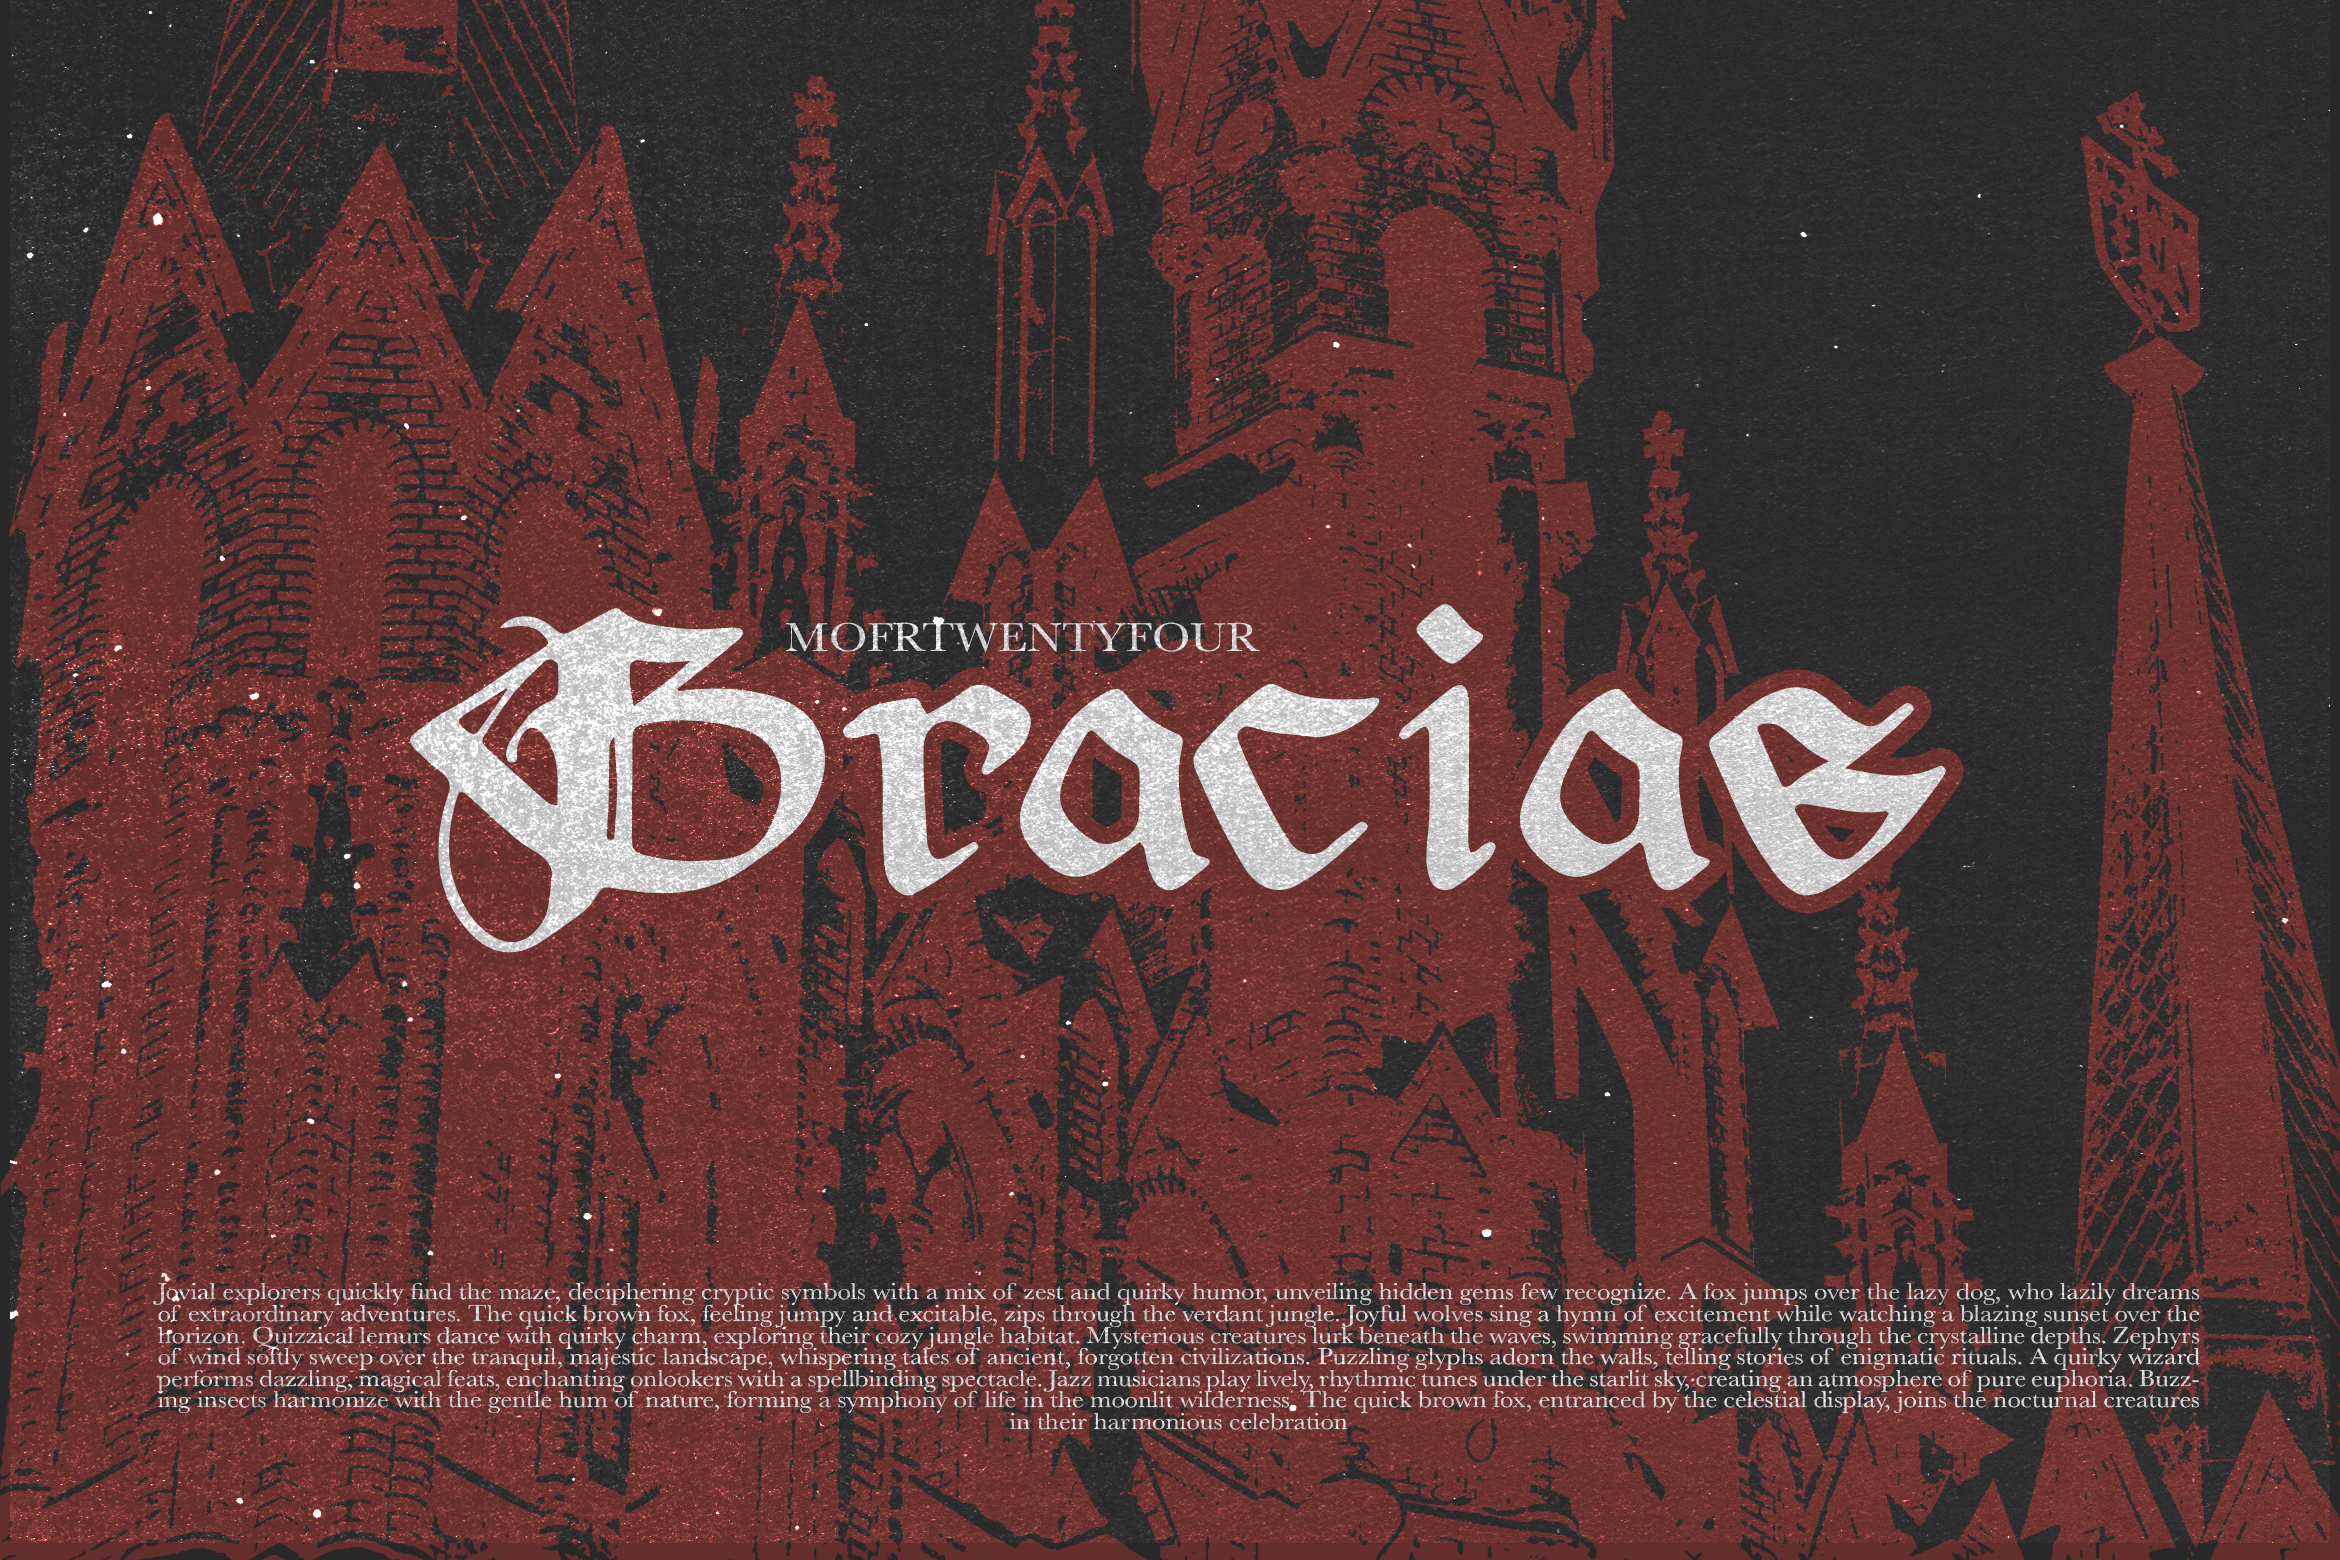 Archdale Blackletter